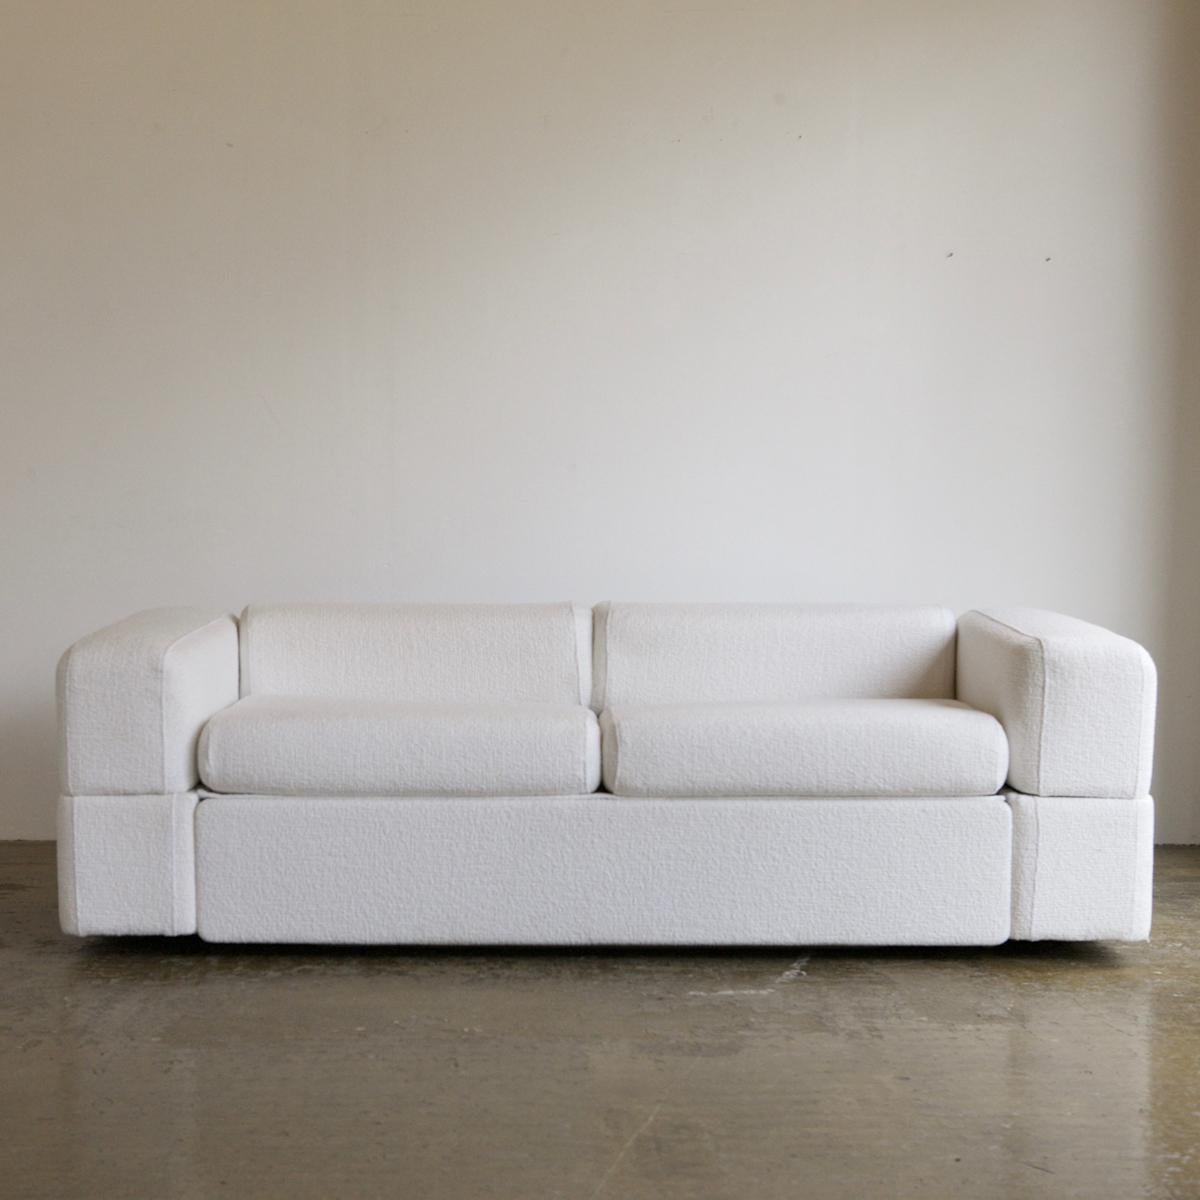 An iconic sofa by Tito Agnoli for Cinova, newly upholstered in a white woven textured wool. A compact and super comfortable piece with a minimalistic design. This version of the Agnoli sofa bed is rare in that a double bed folds out. The arms flip